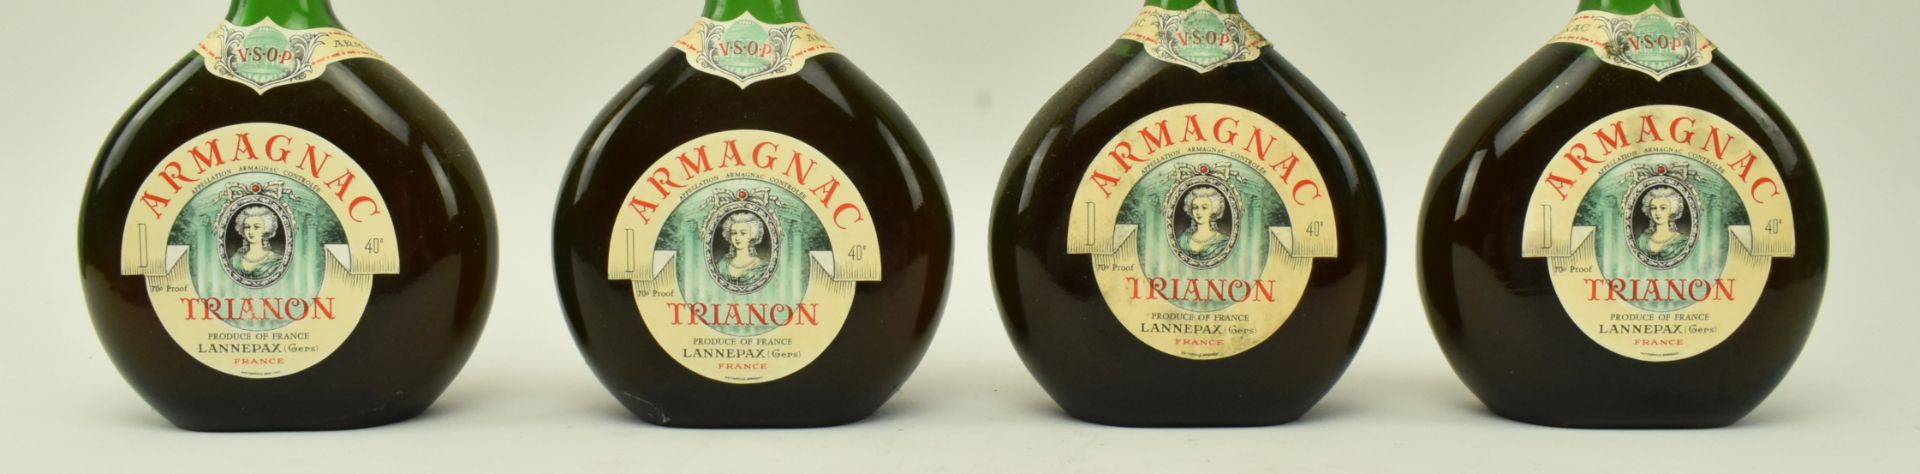 FOUR BOXED TRIANON VSOP ARMAGNAC 1961 BOTTLES (4) - Image 4 of 7